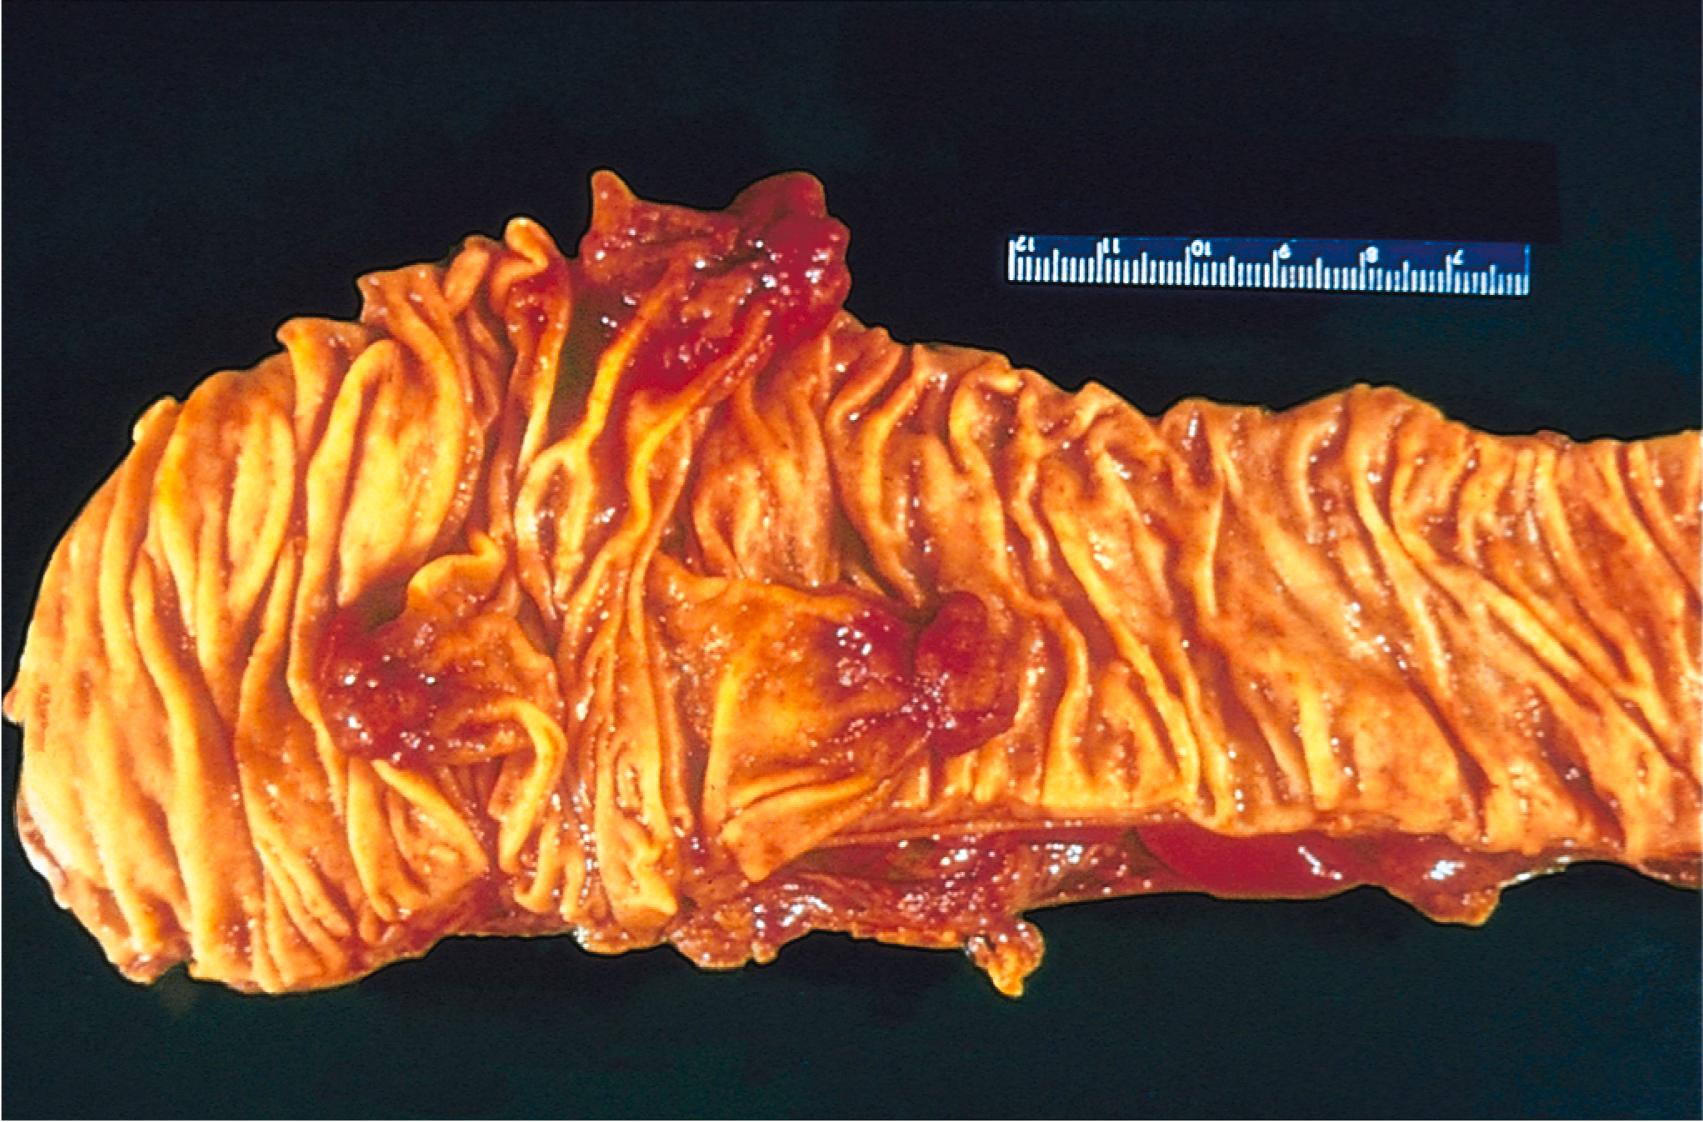 FIG. 6.1, Colonic polyps. Several pedunculated “velvety” polyps are seen in this segment of colon.